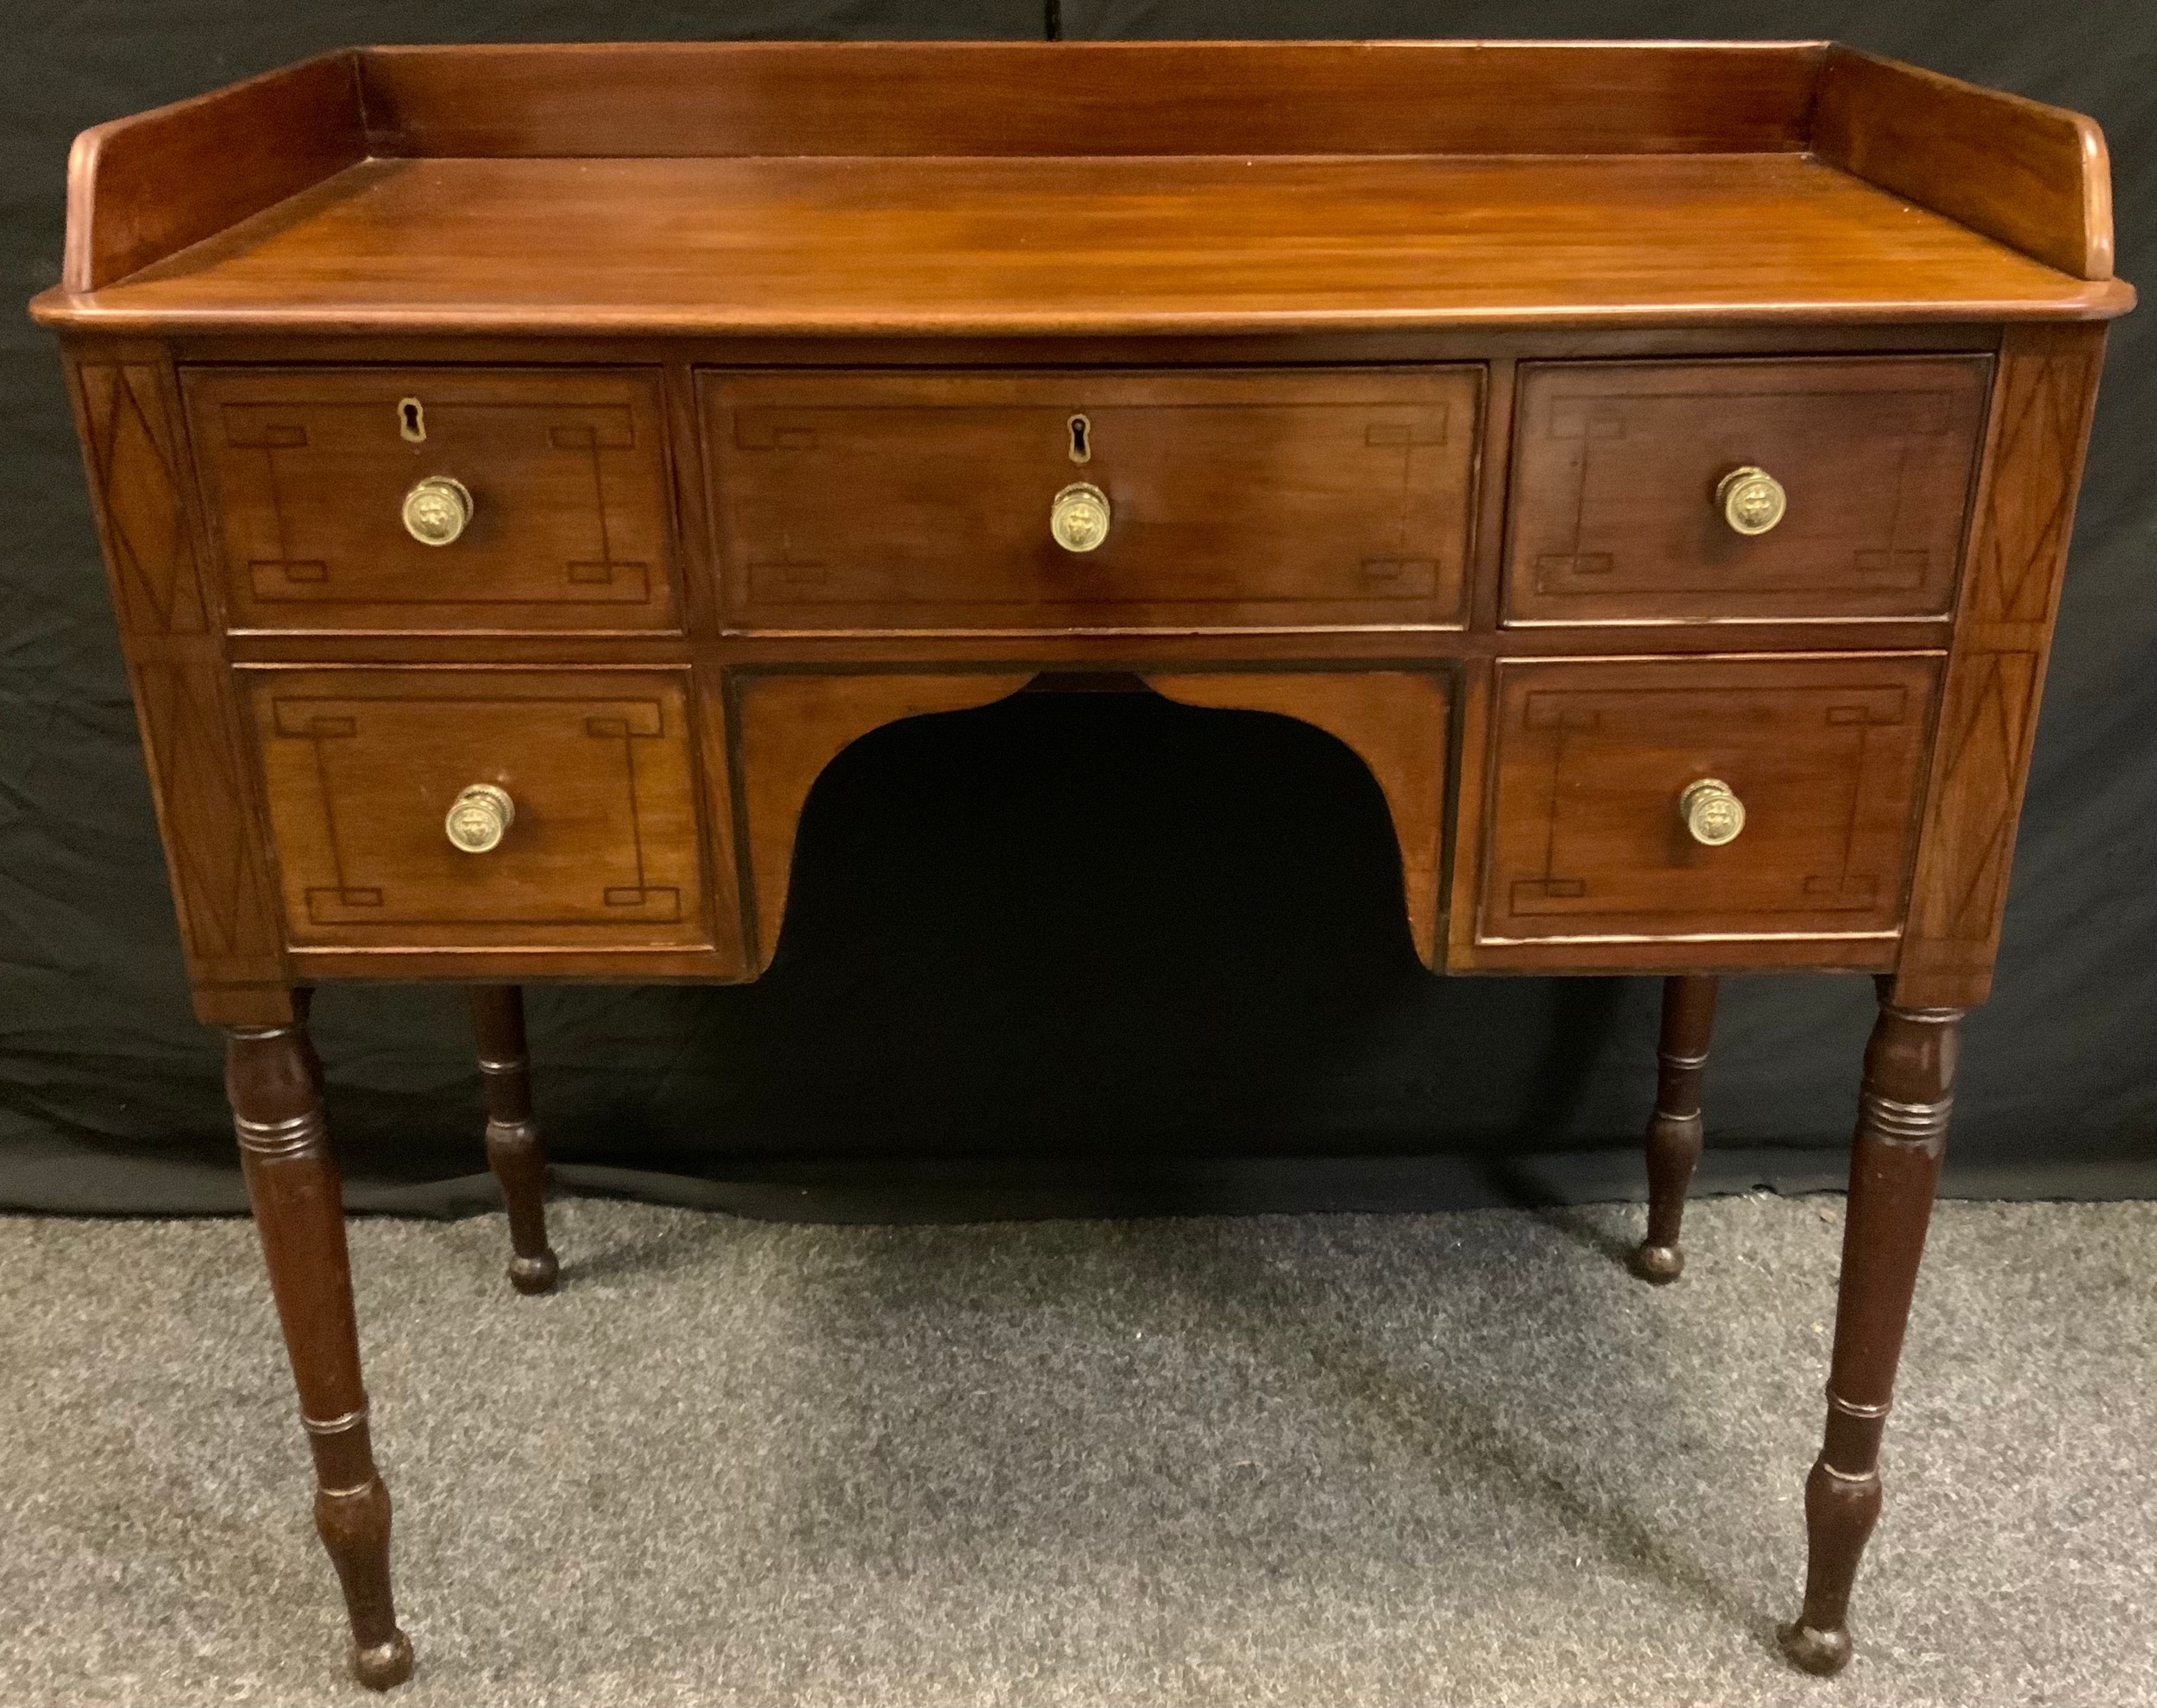 A George III style mahogany knee-hole desk, three quarter gallery rectangular top above a central